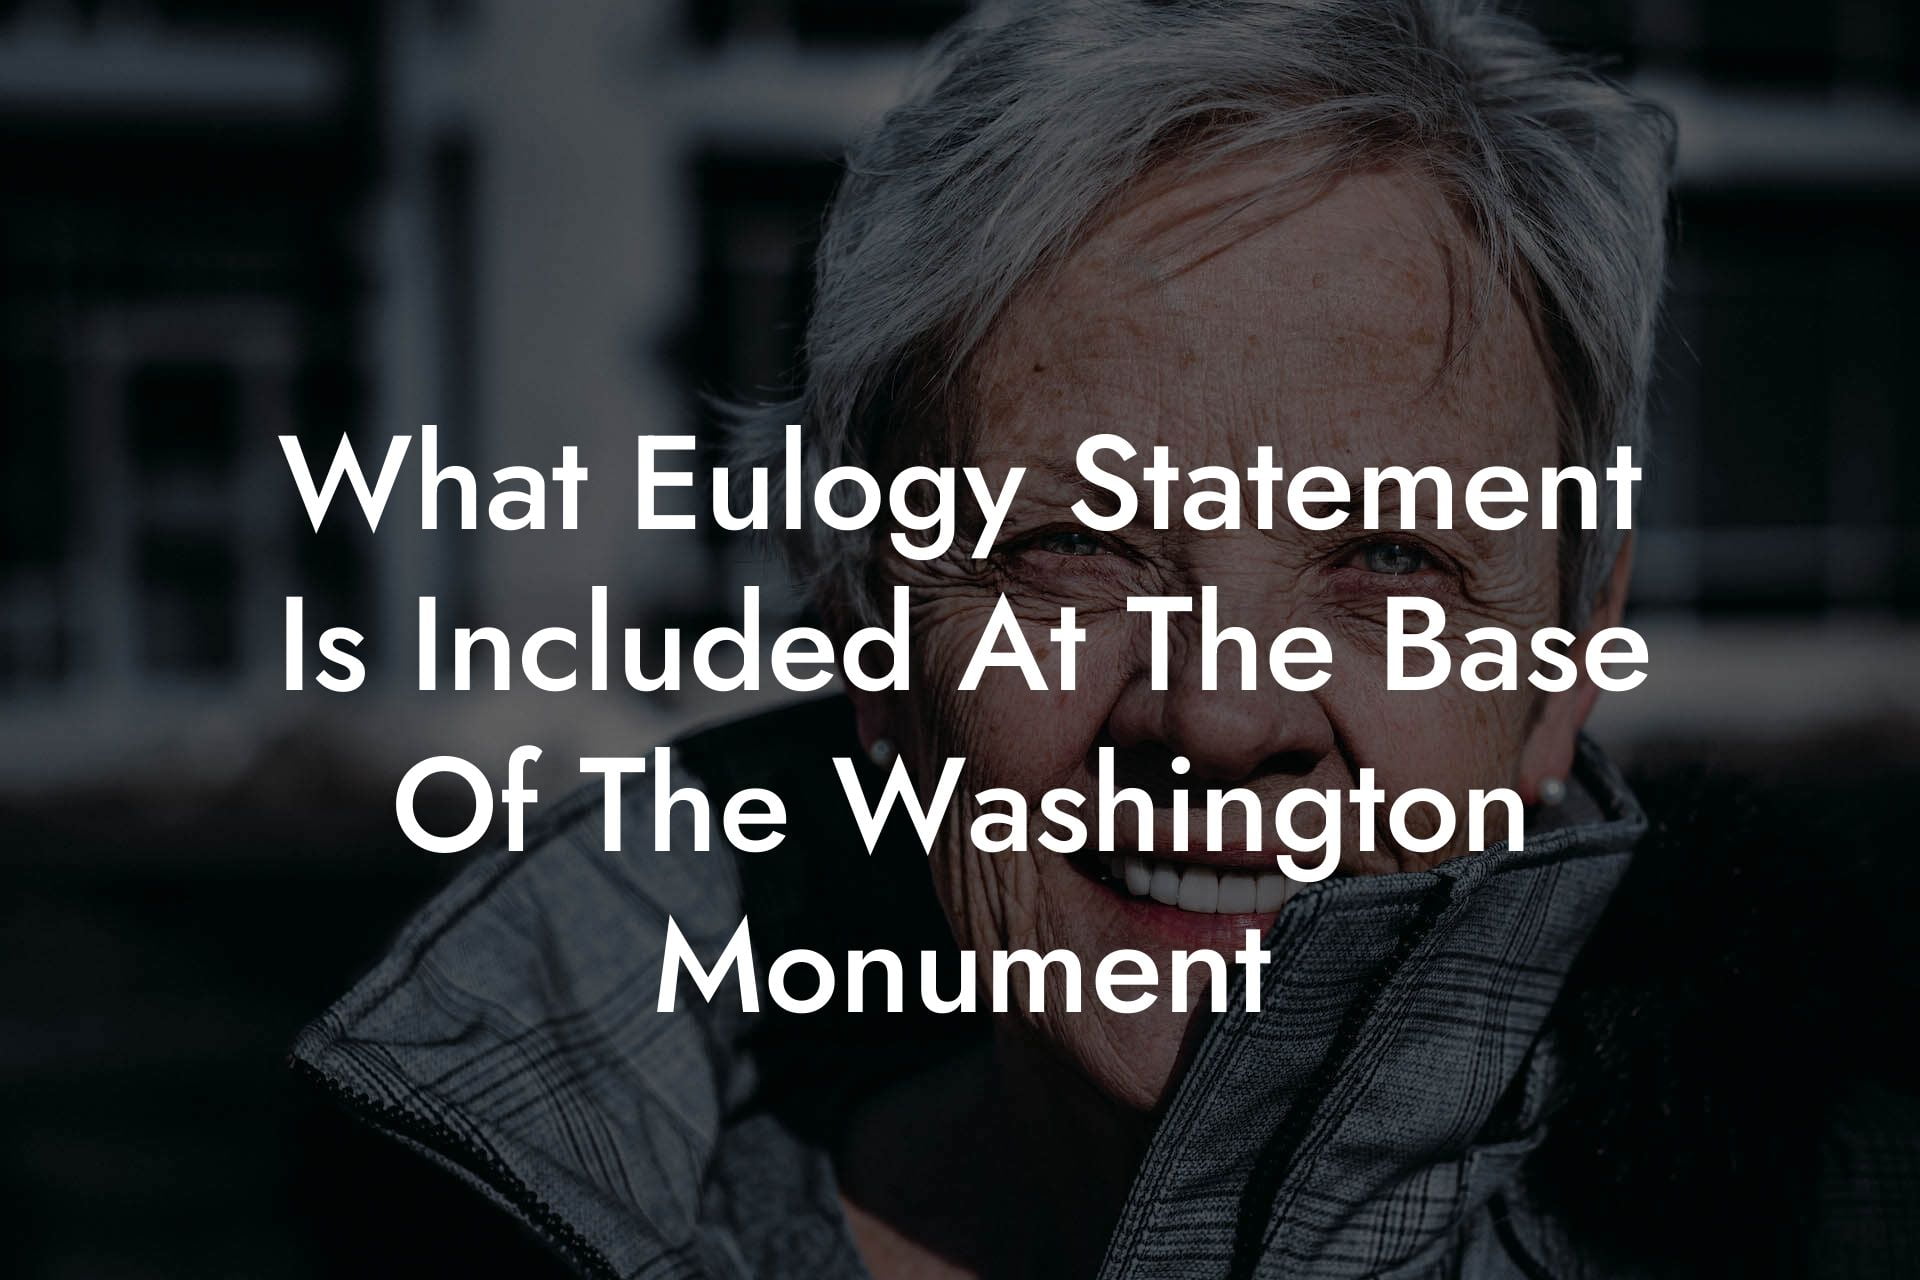 What Eulogy Statement Is Included At The Base Of The Washington Monument